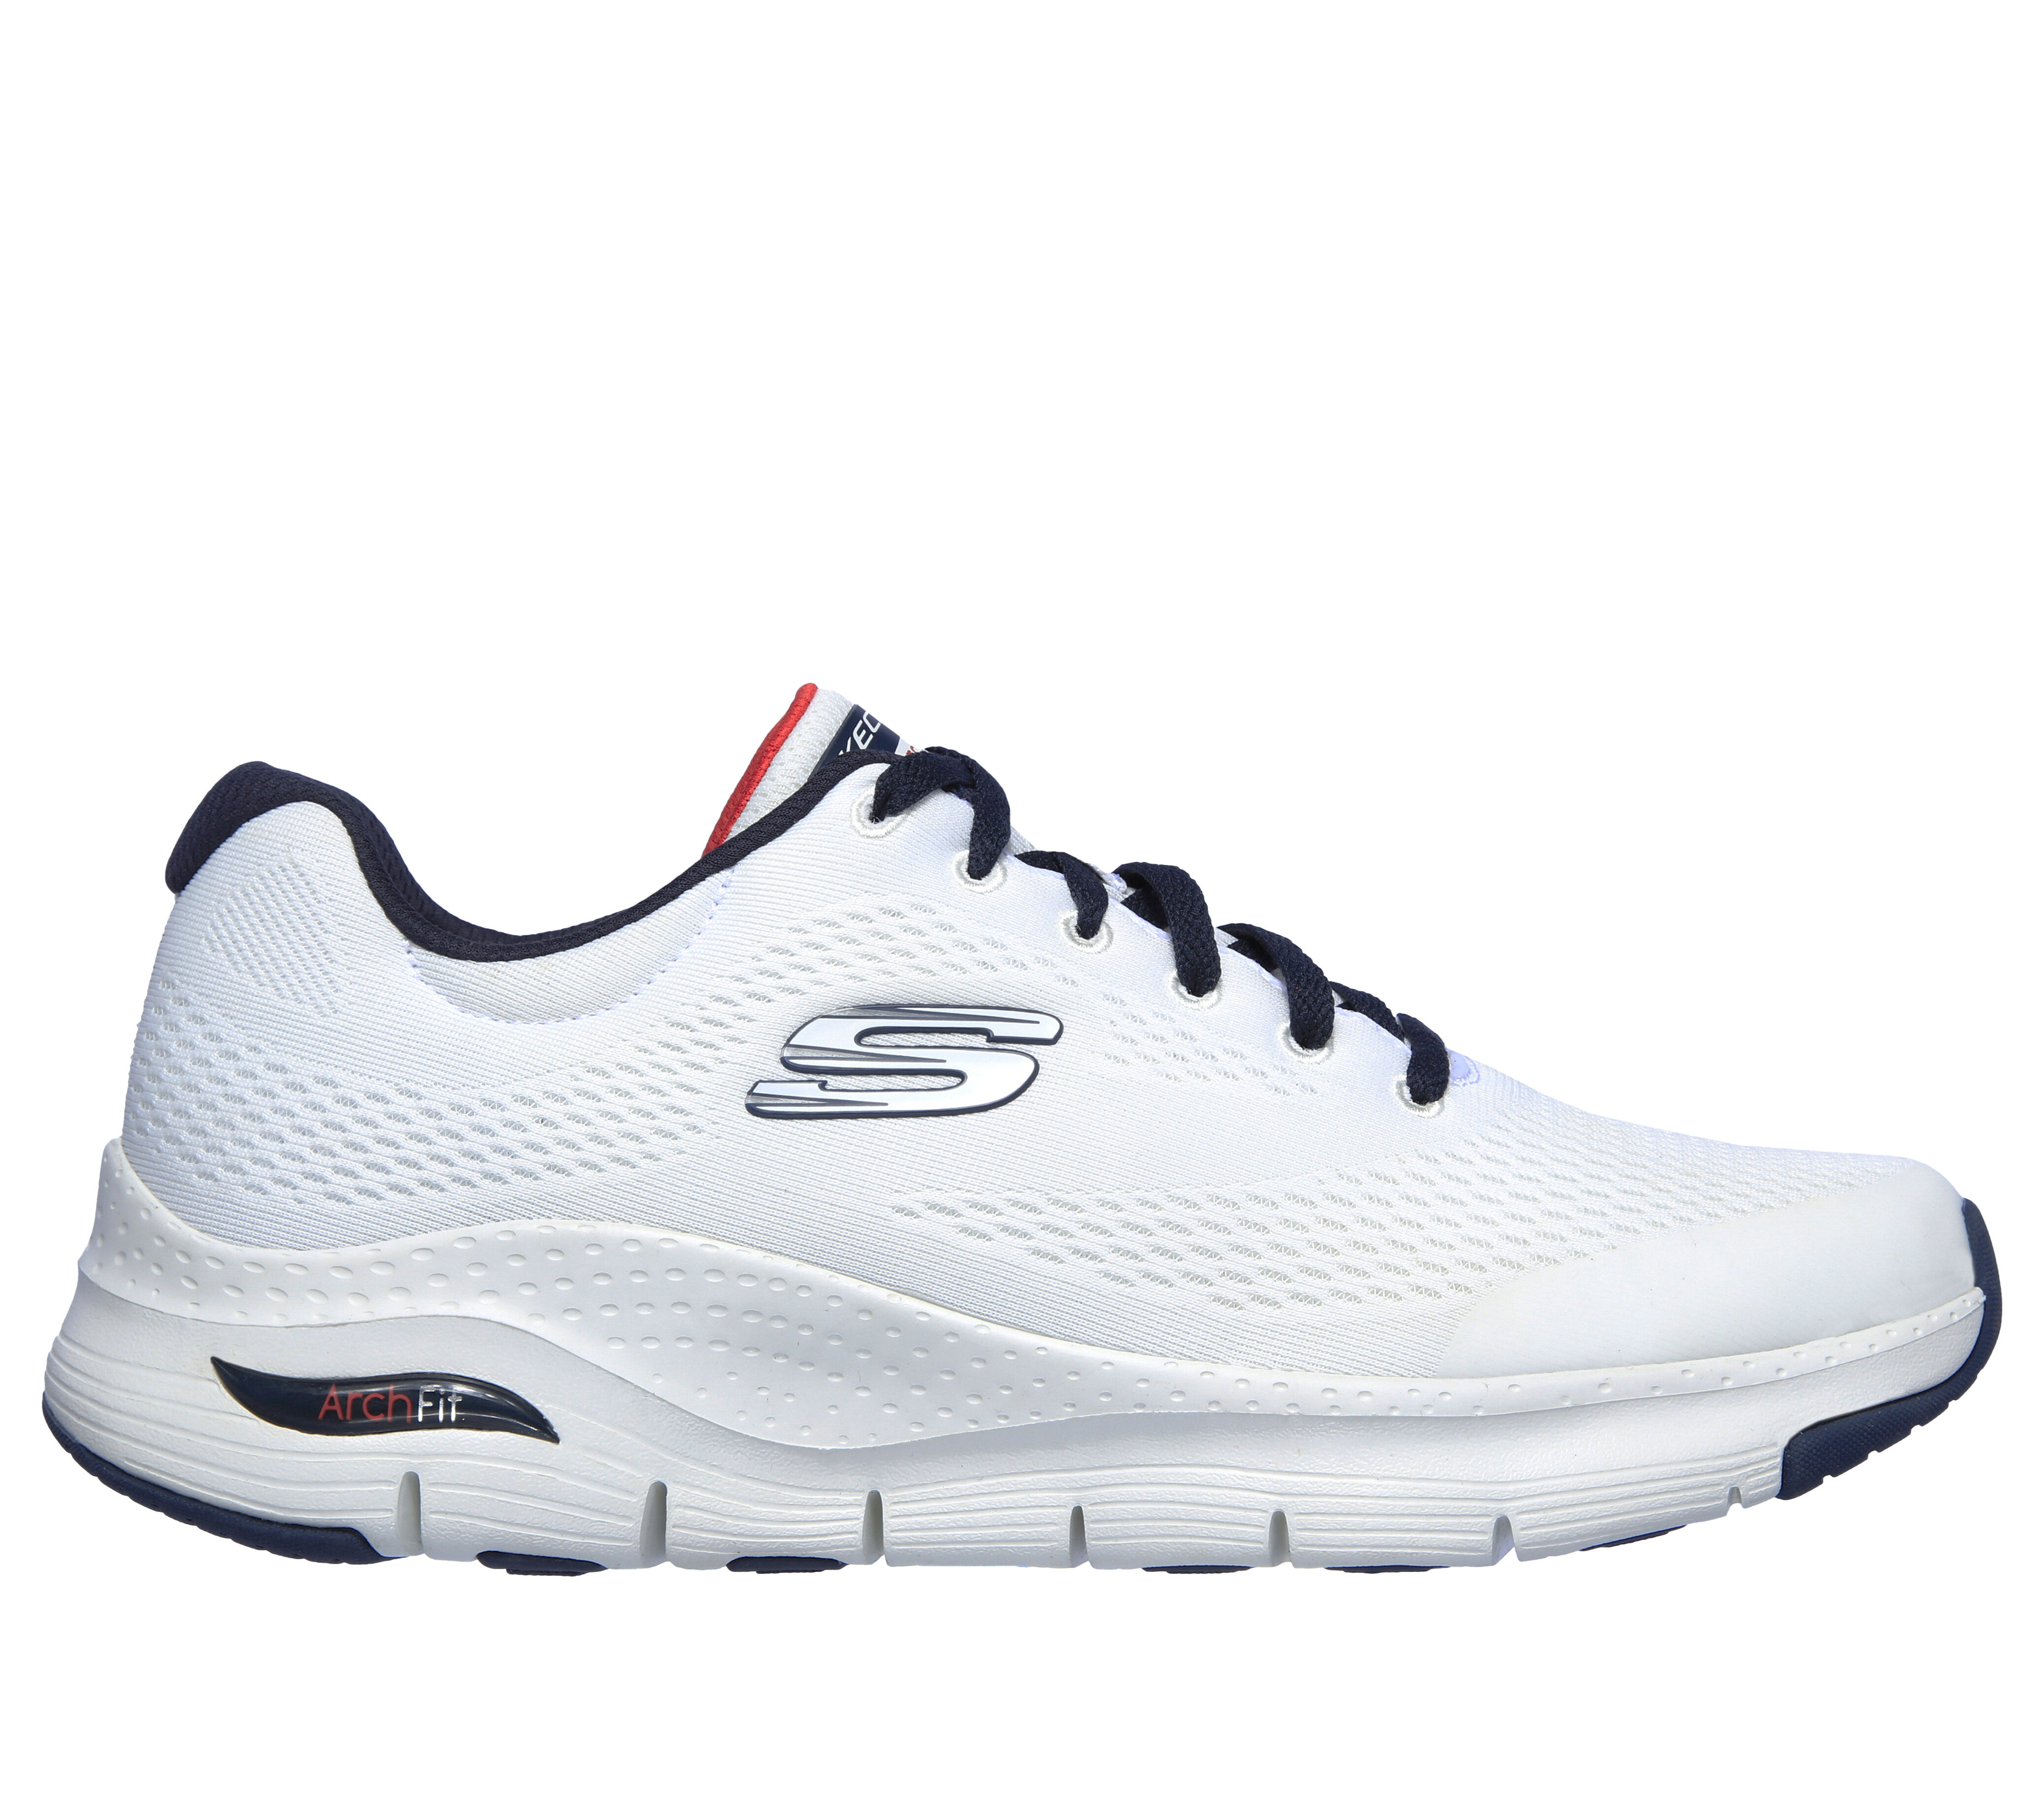 skechers tennis shoes for sale